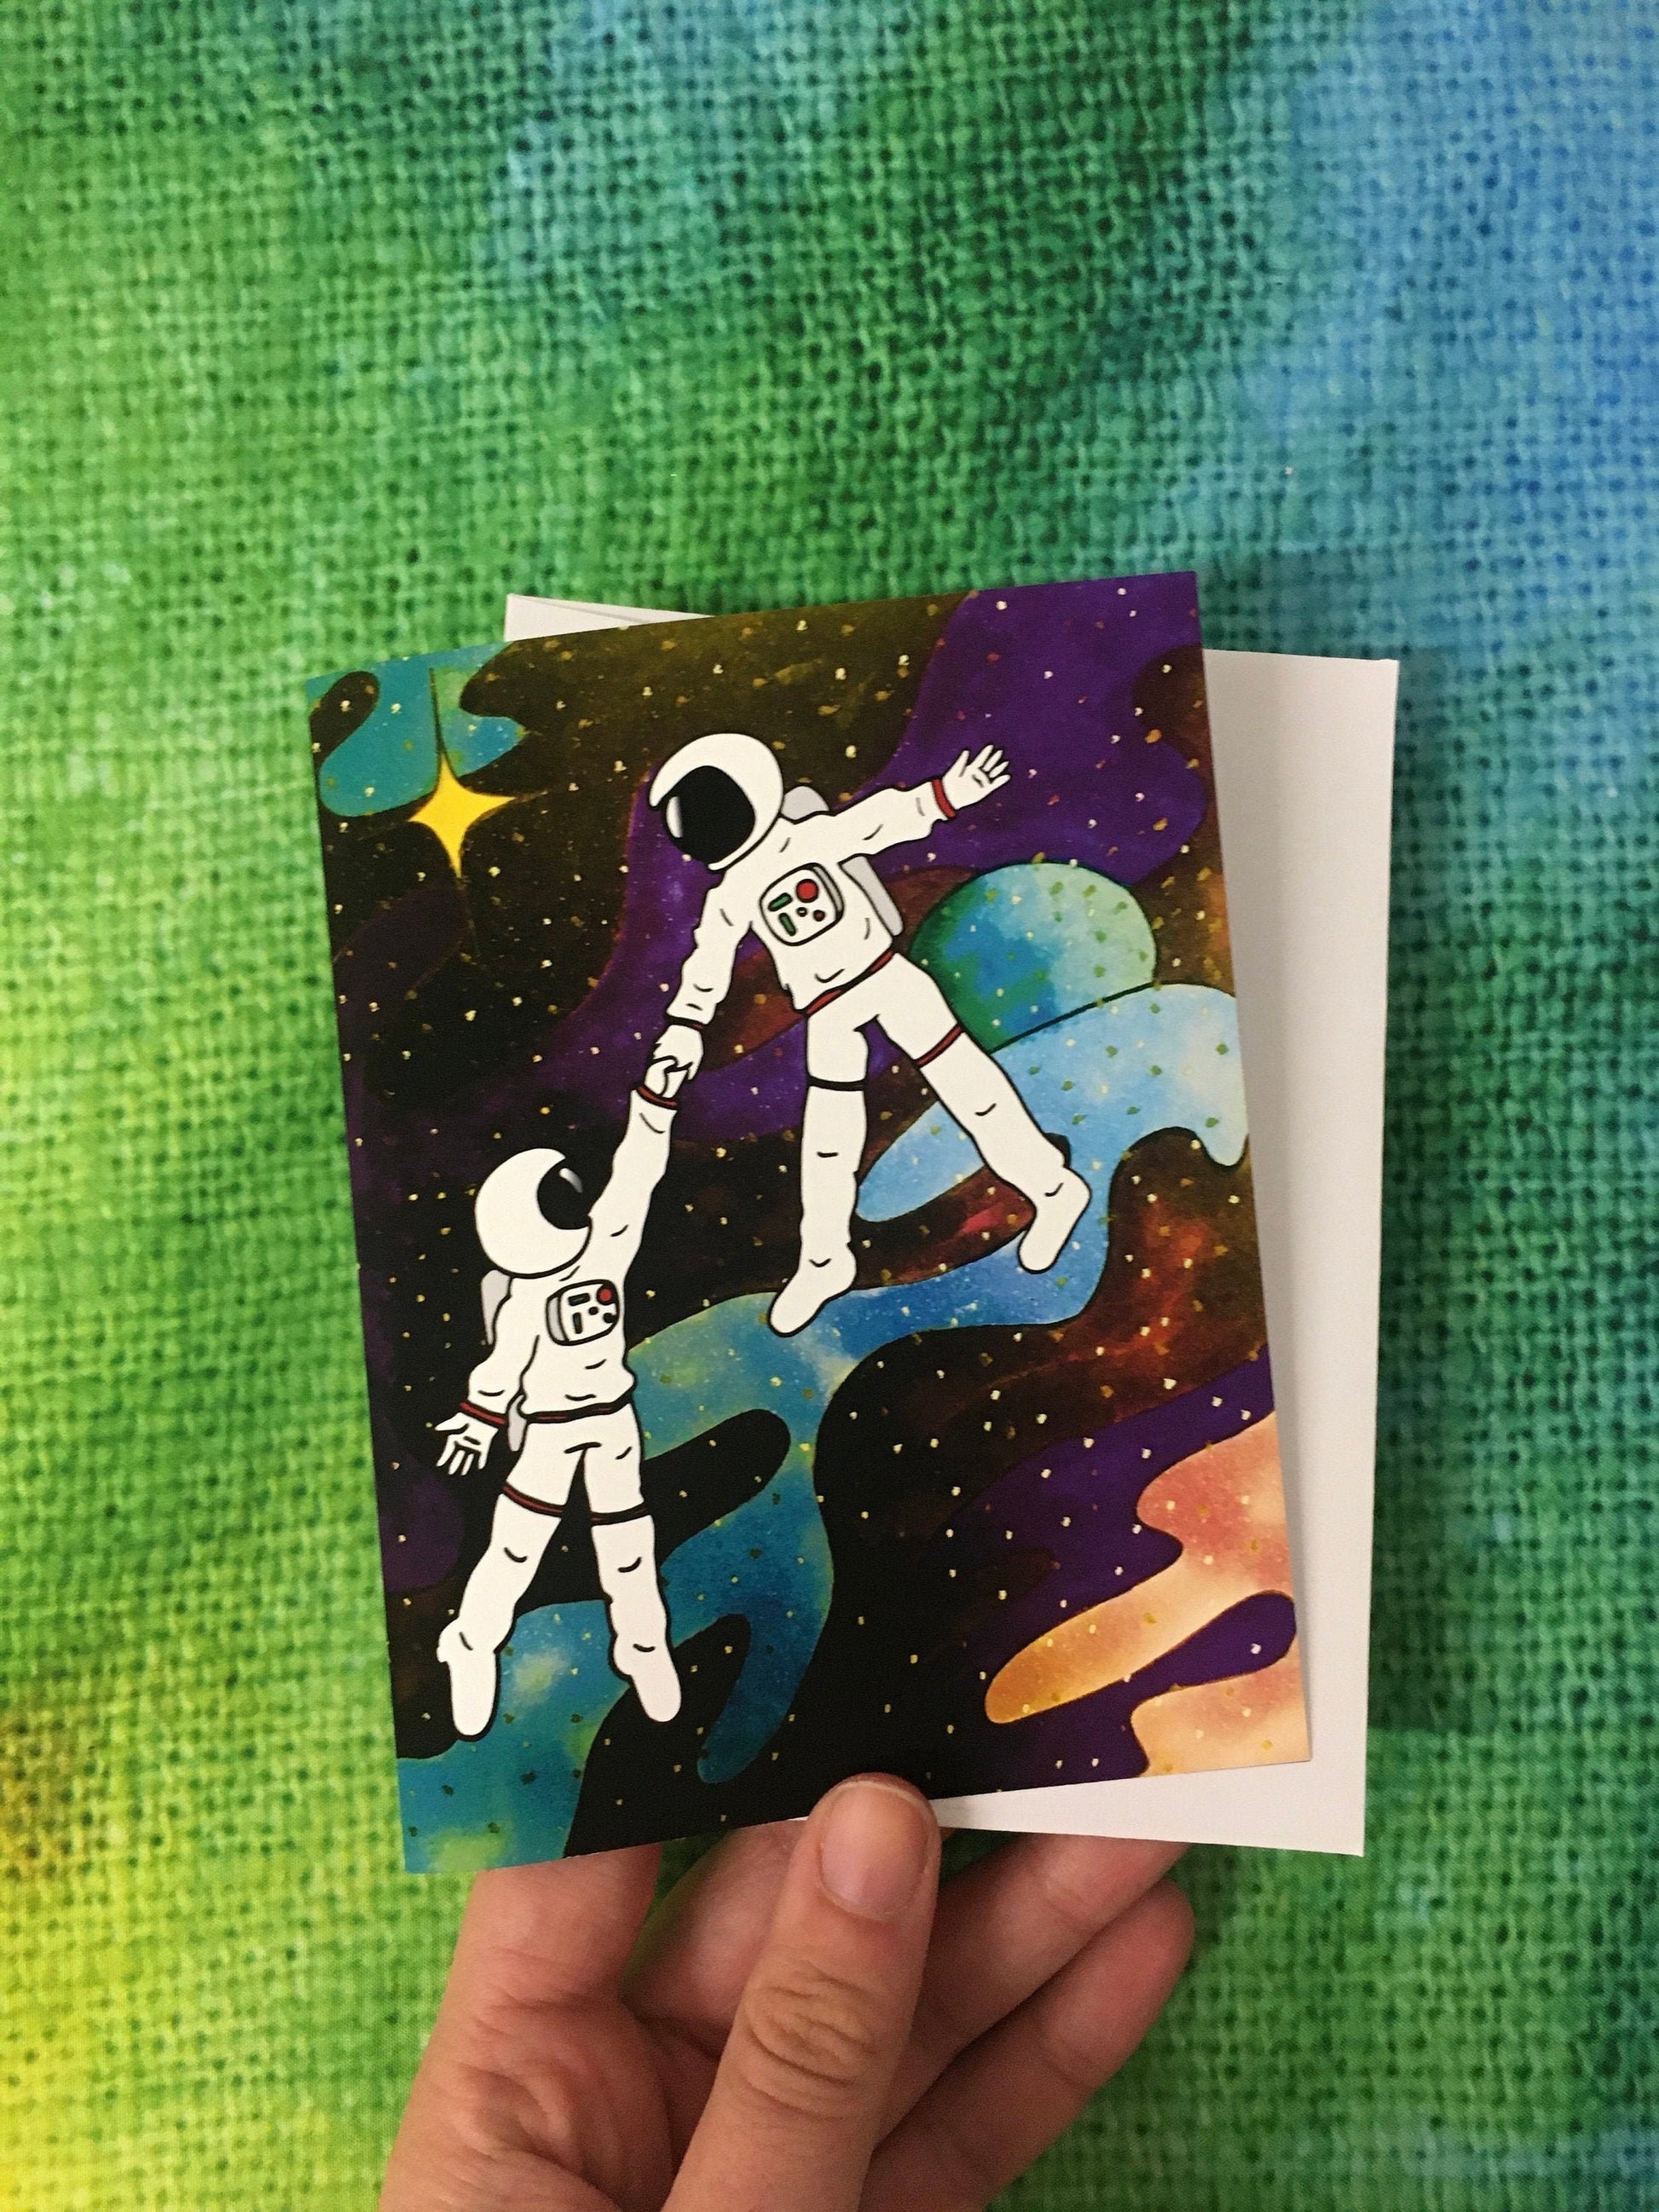 A hand holding a greeting card featuring an illustration of two astronauts floating in space while holding hands. The inside of the card reads, "you take me to outerspace."